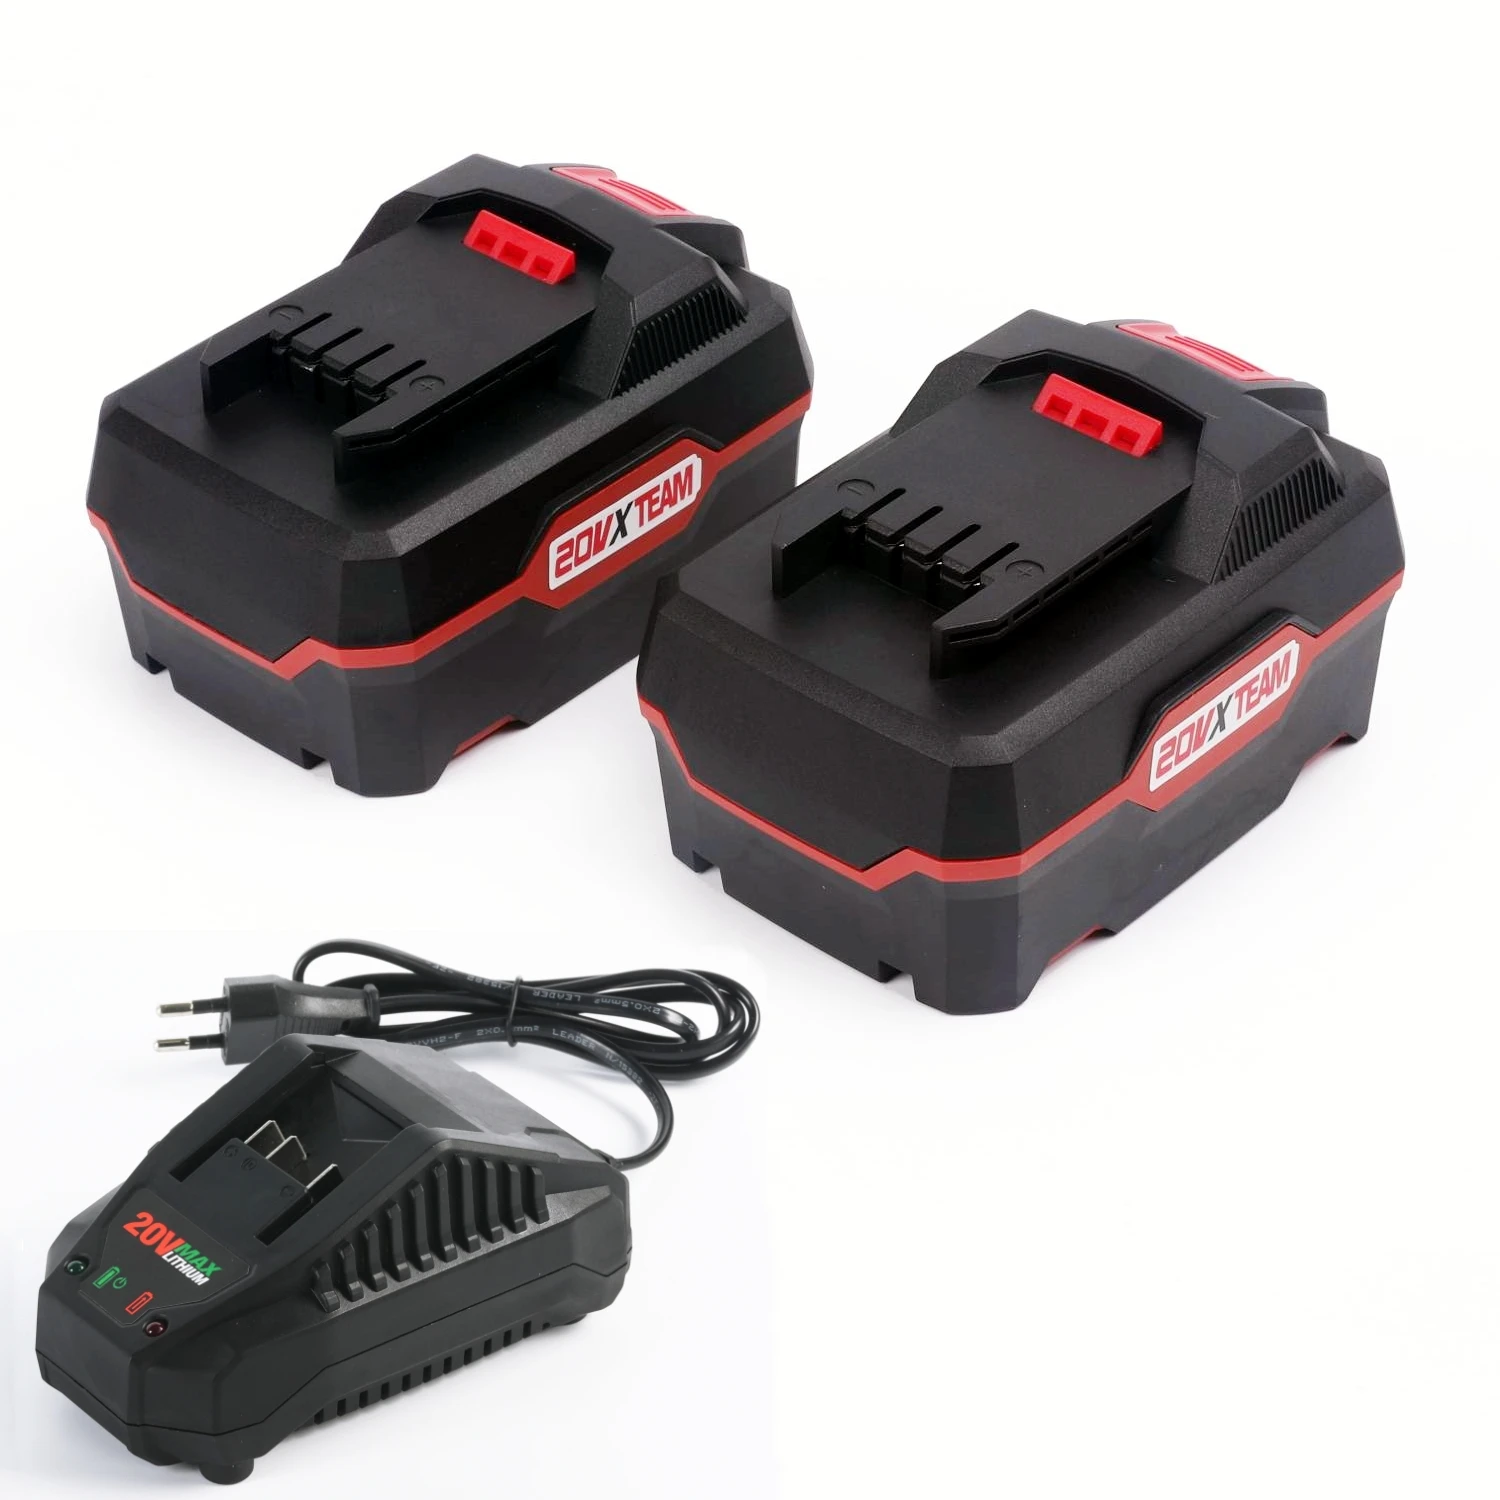 

2PCS 20V 5Ah Akku, 1PCS 2.4A Fast Charger for Parkside 20V Team Cordless Power Tool for for PAP 20 A3, PAP 20 B3, PAPS 208 A1